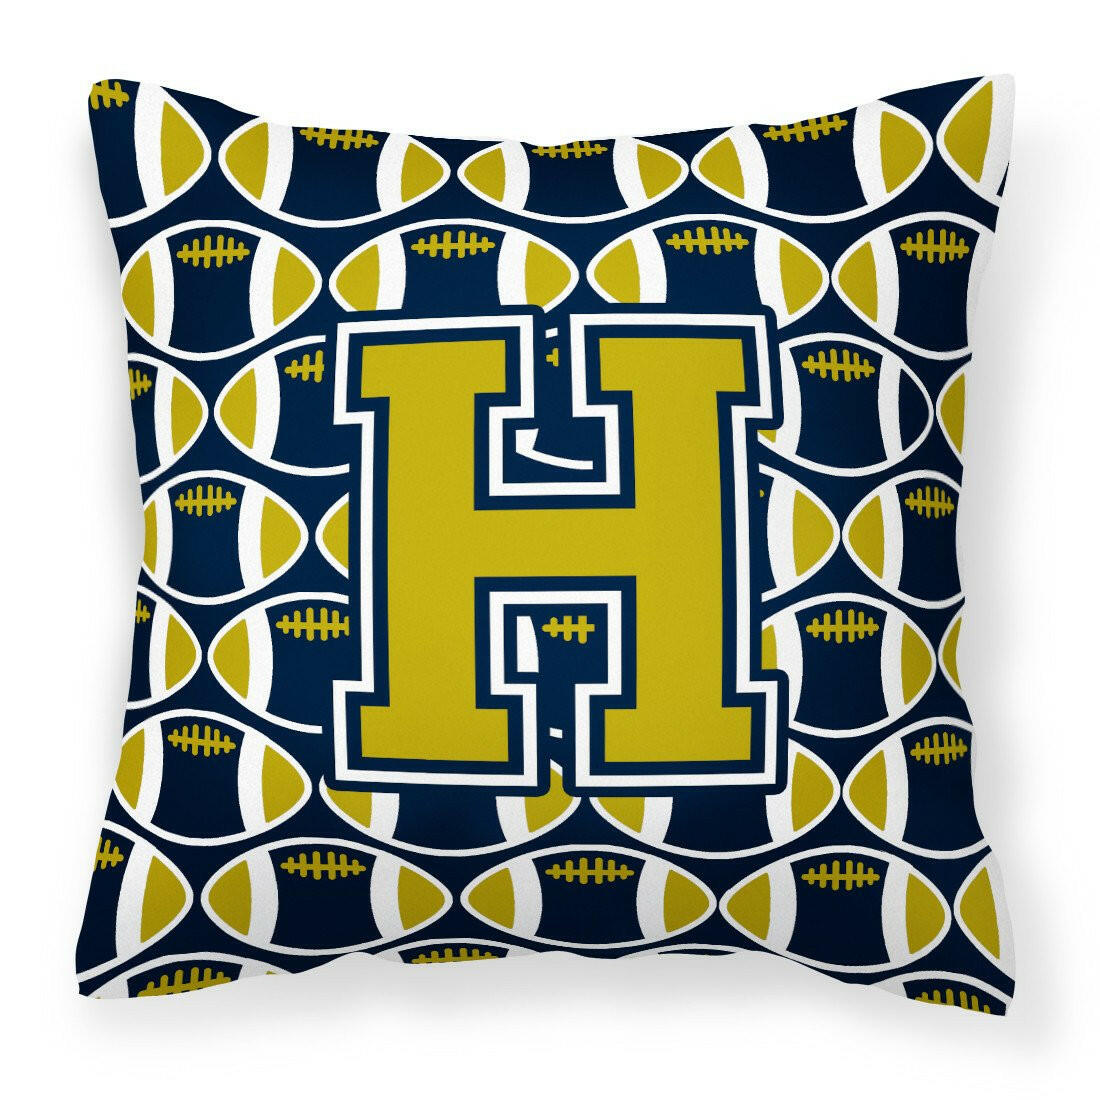 Letter H Football Blue and Gold Fabric Decorative Pillow CJ1074-HPW1414 by Caroline's Treasures